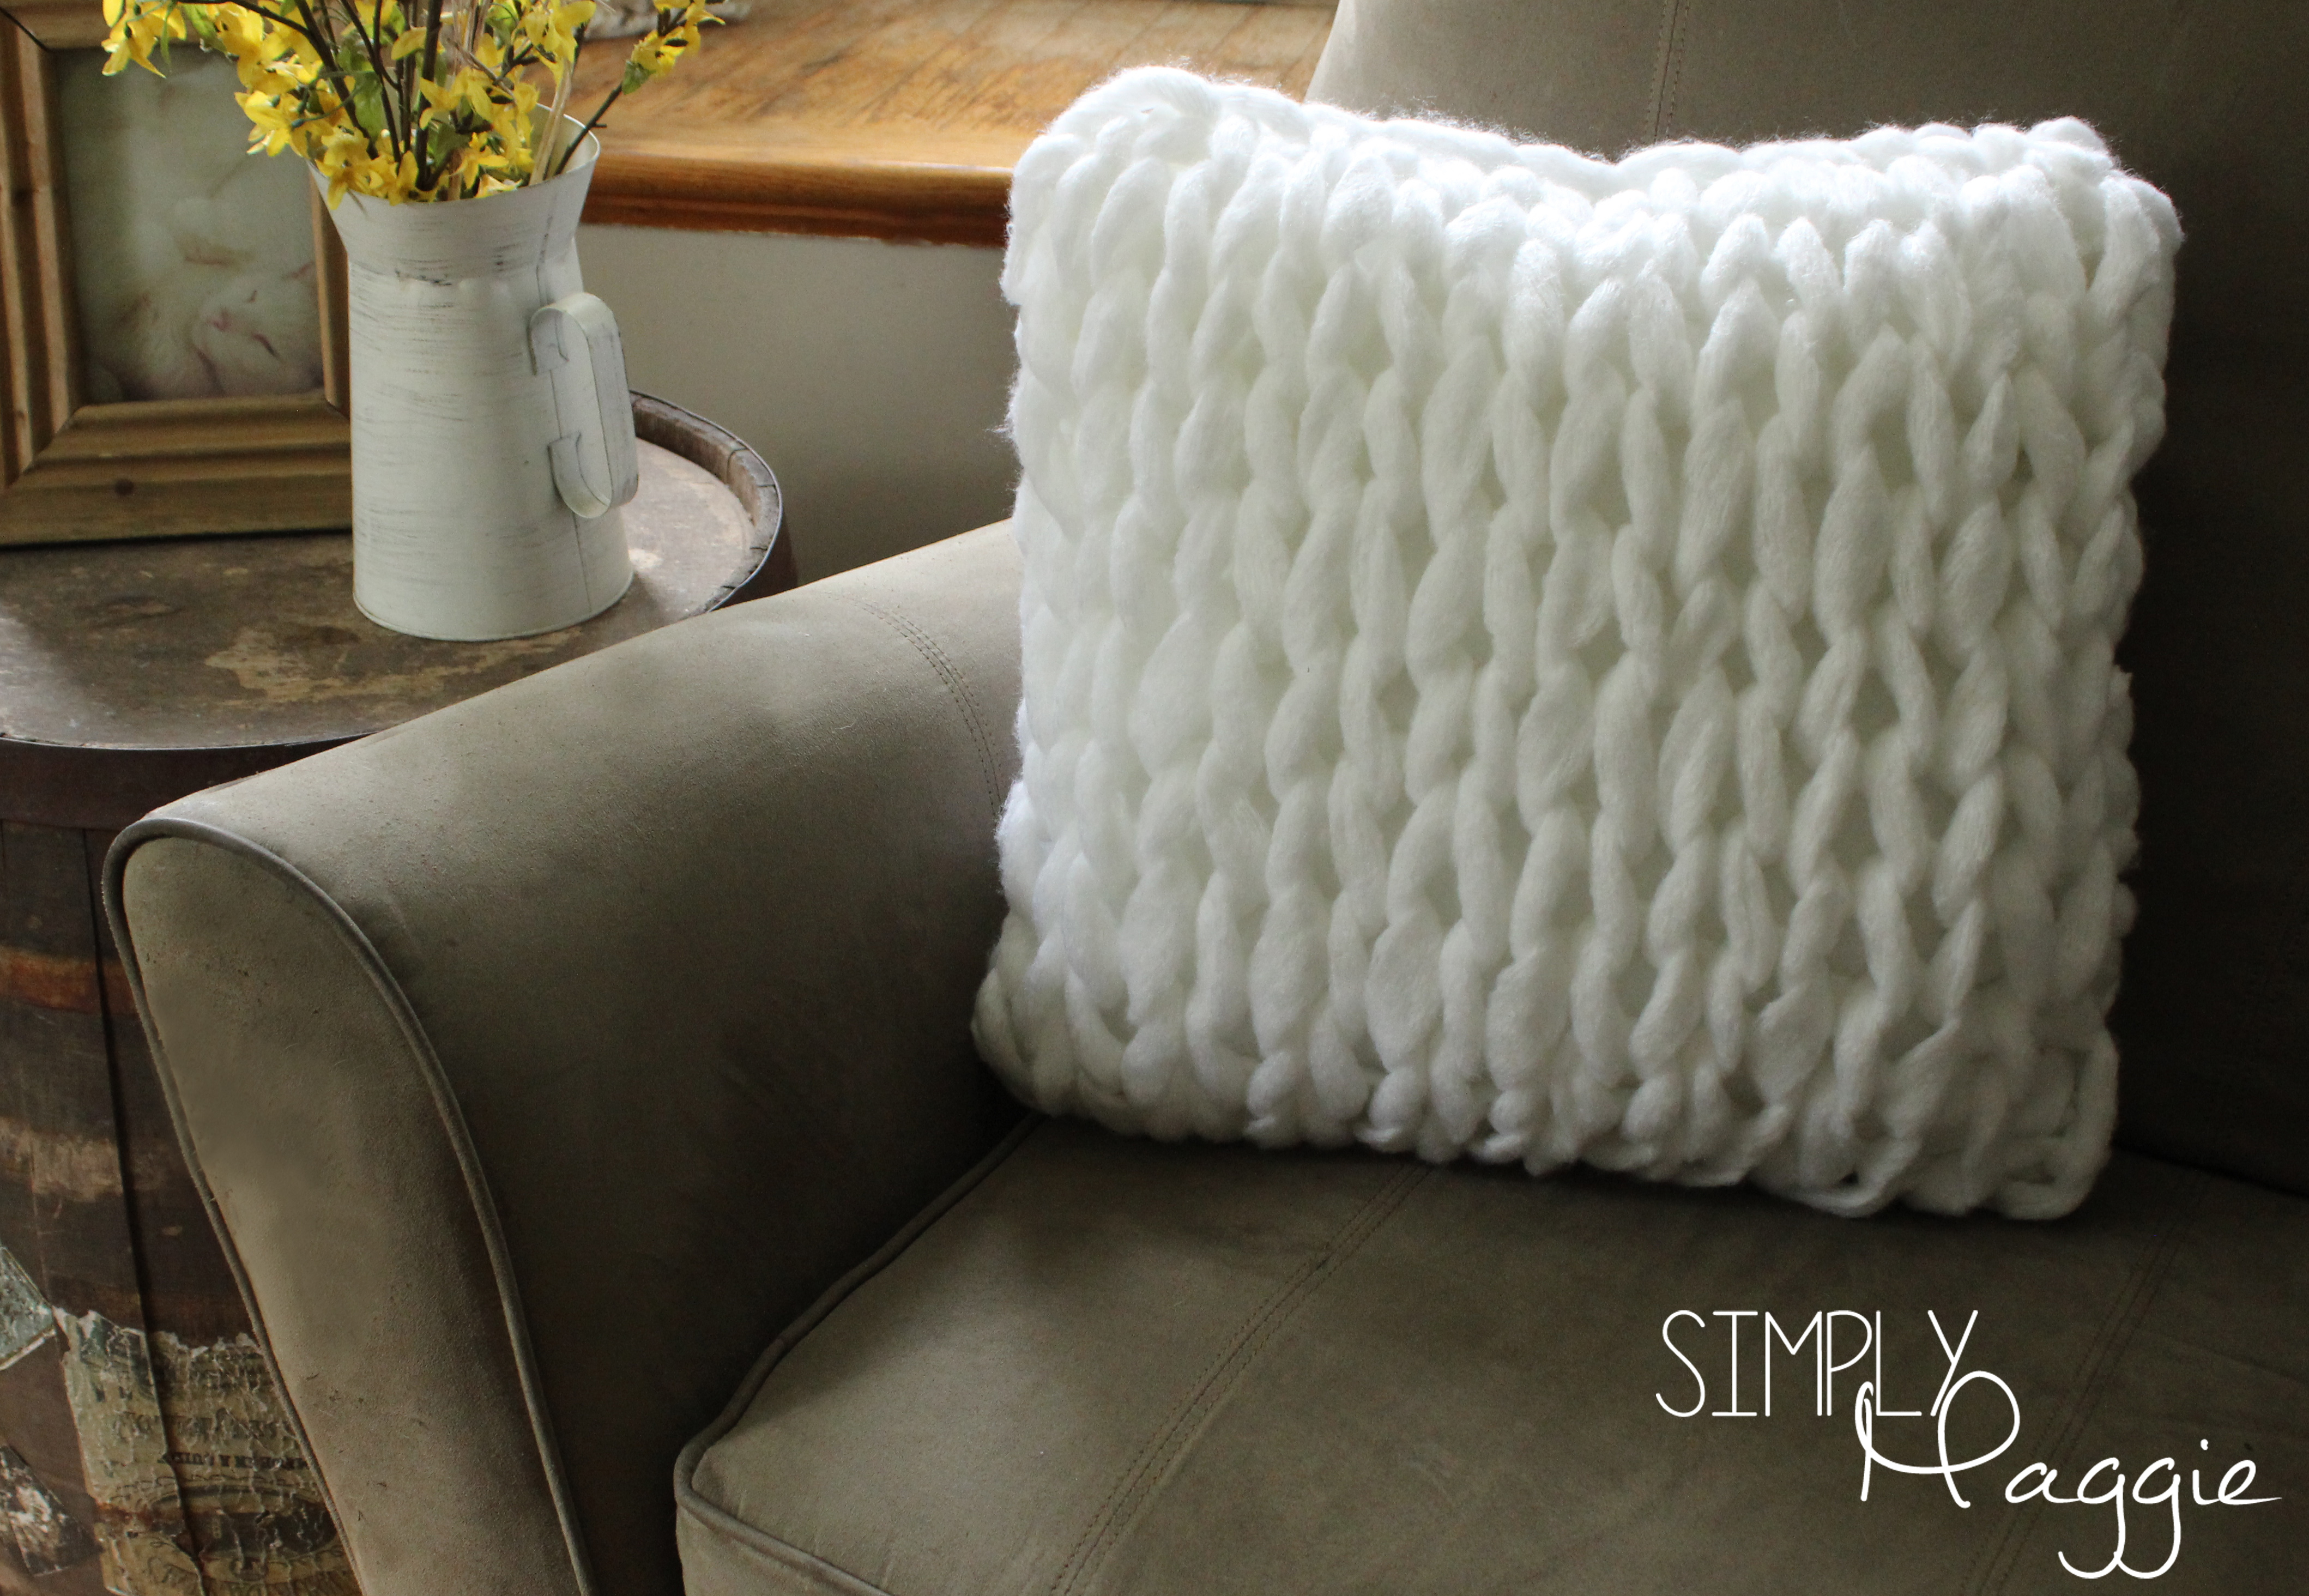 Free Cushion Knitting Patterns One Hour Arm Knit Pillow Pattern Simply Maggie Simplymaggie